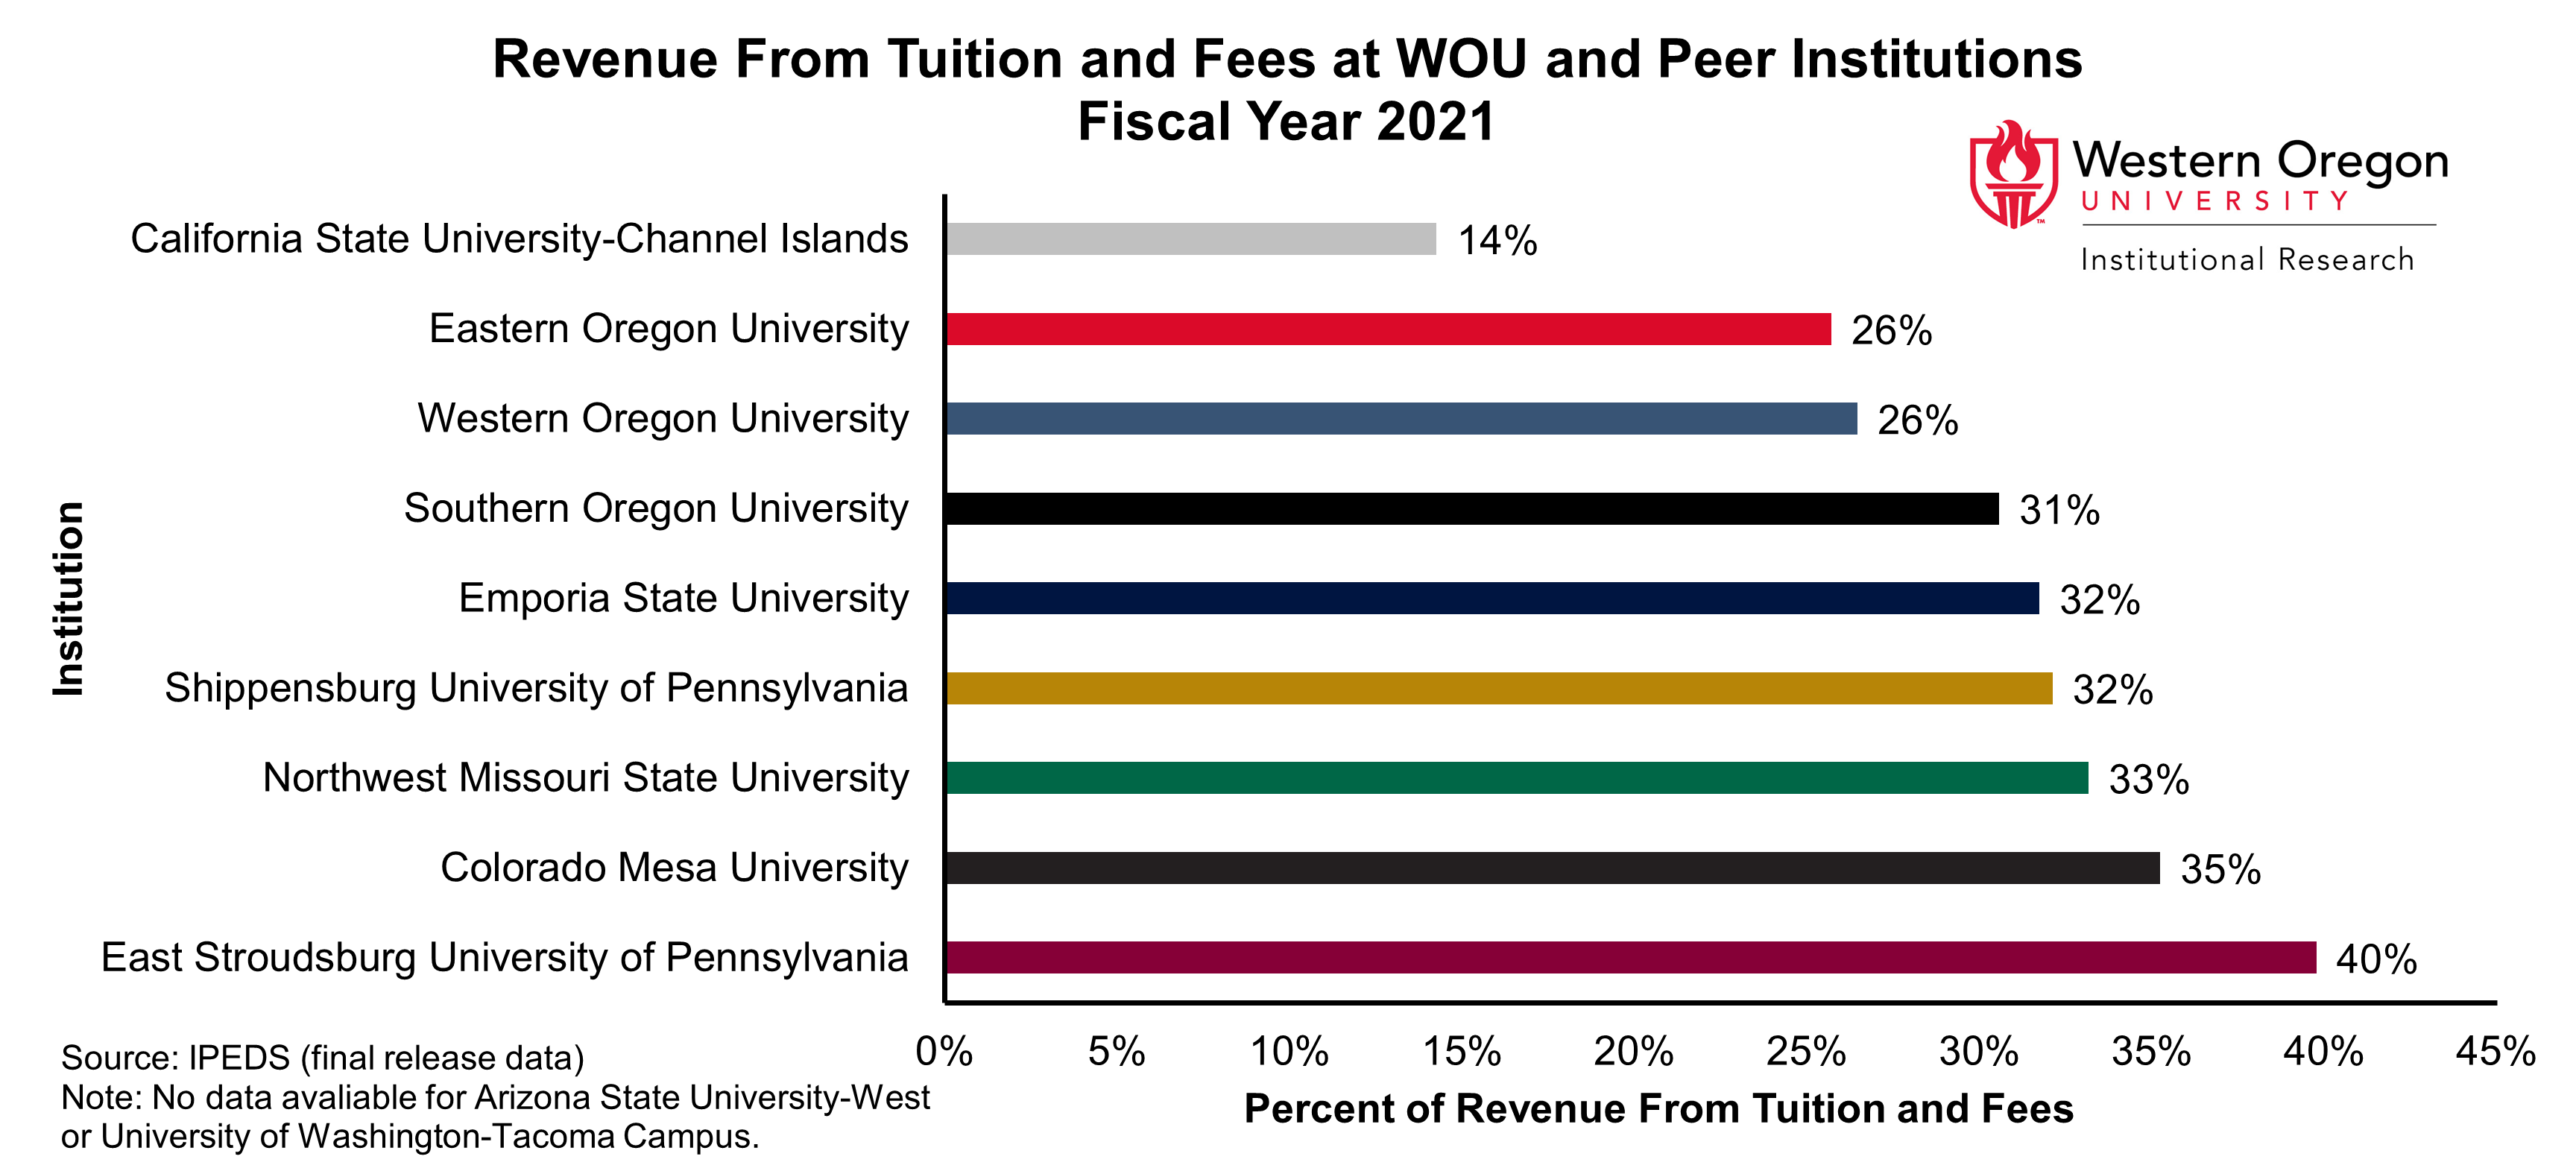 Bar graph of the percentage of revenue from tuition and fees for WOU and peer universities in 2021, showing percentages that range from 14% to 40% with WOU's percentage falling in the bottom half of the distribution